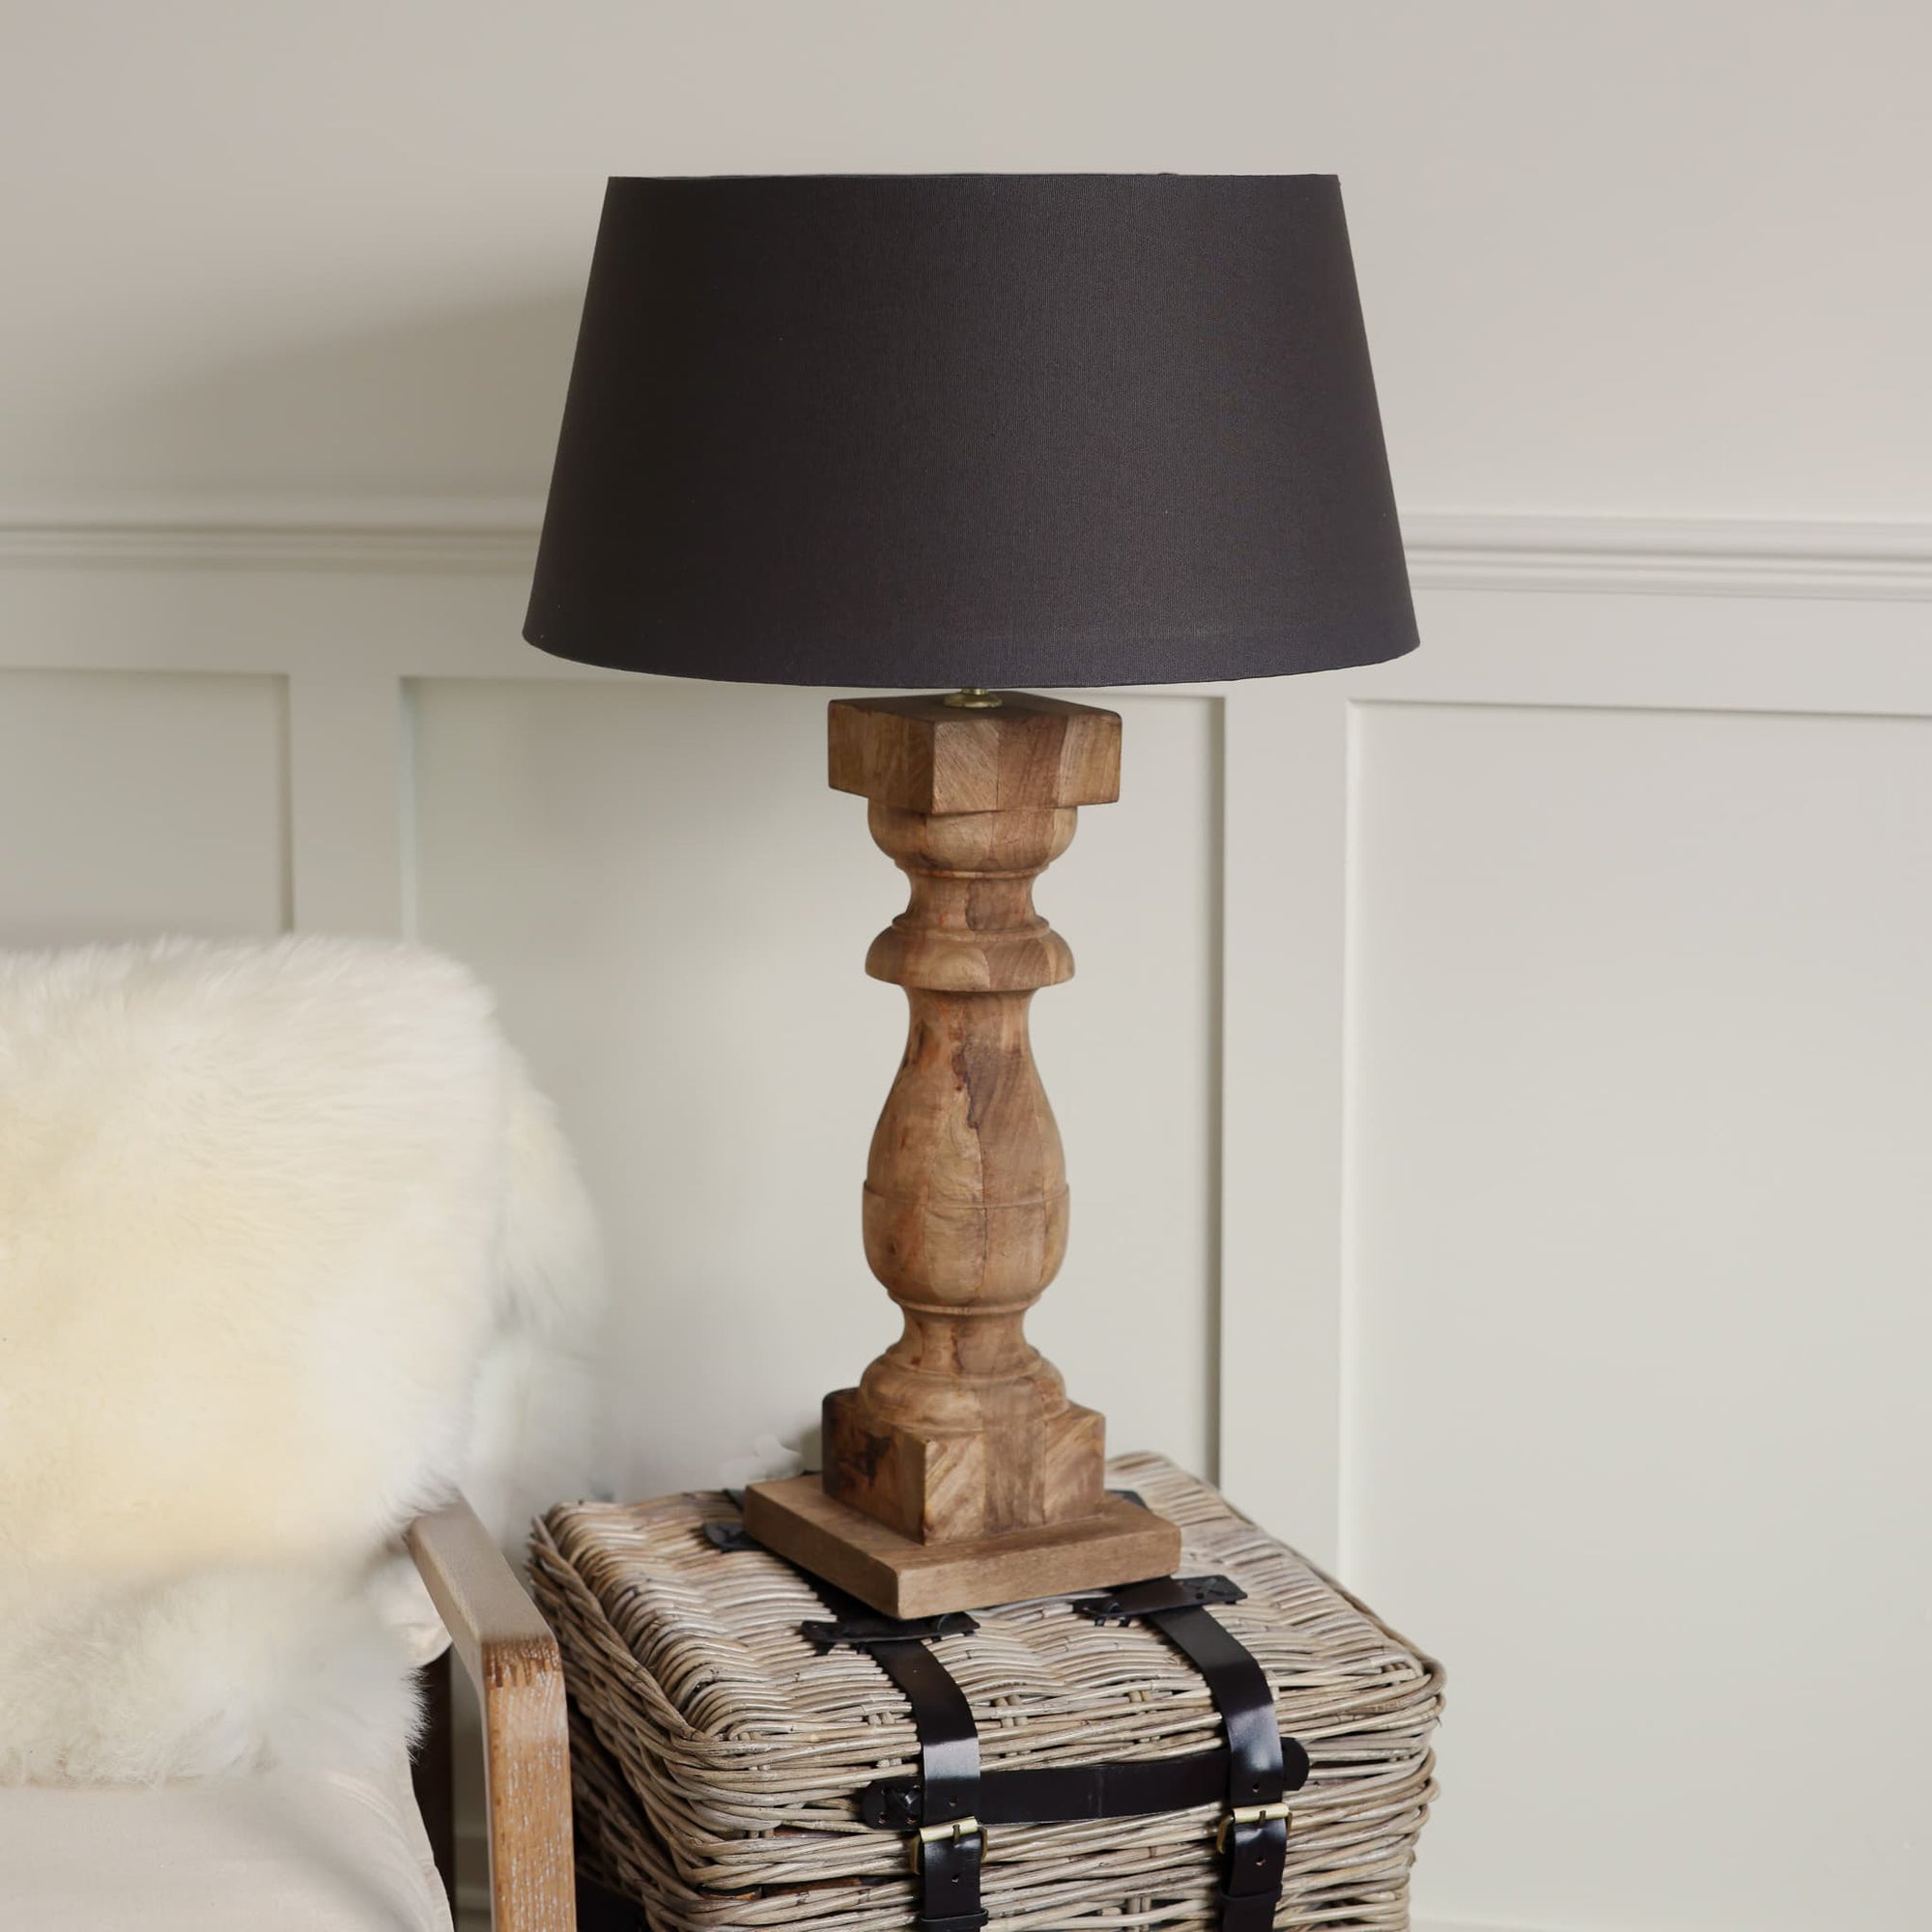 Tall column wooden lamp on side table with black shade.